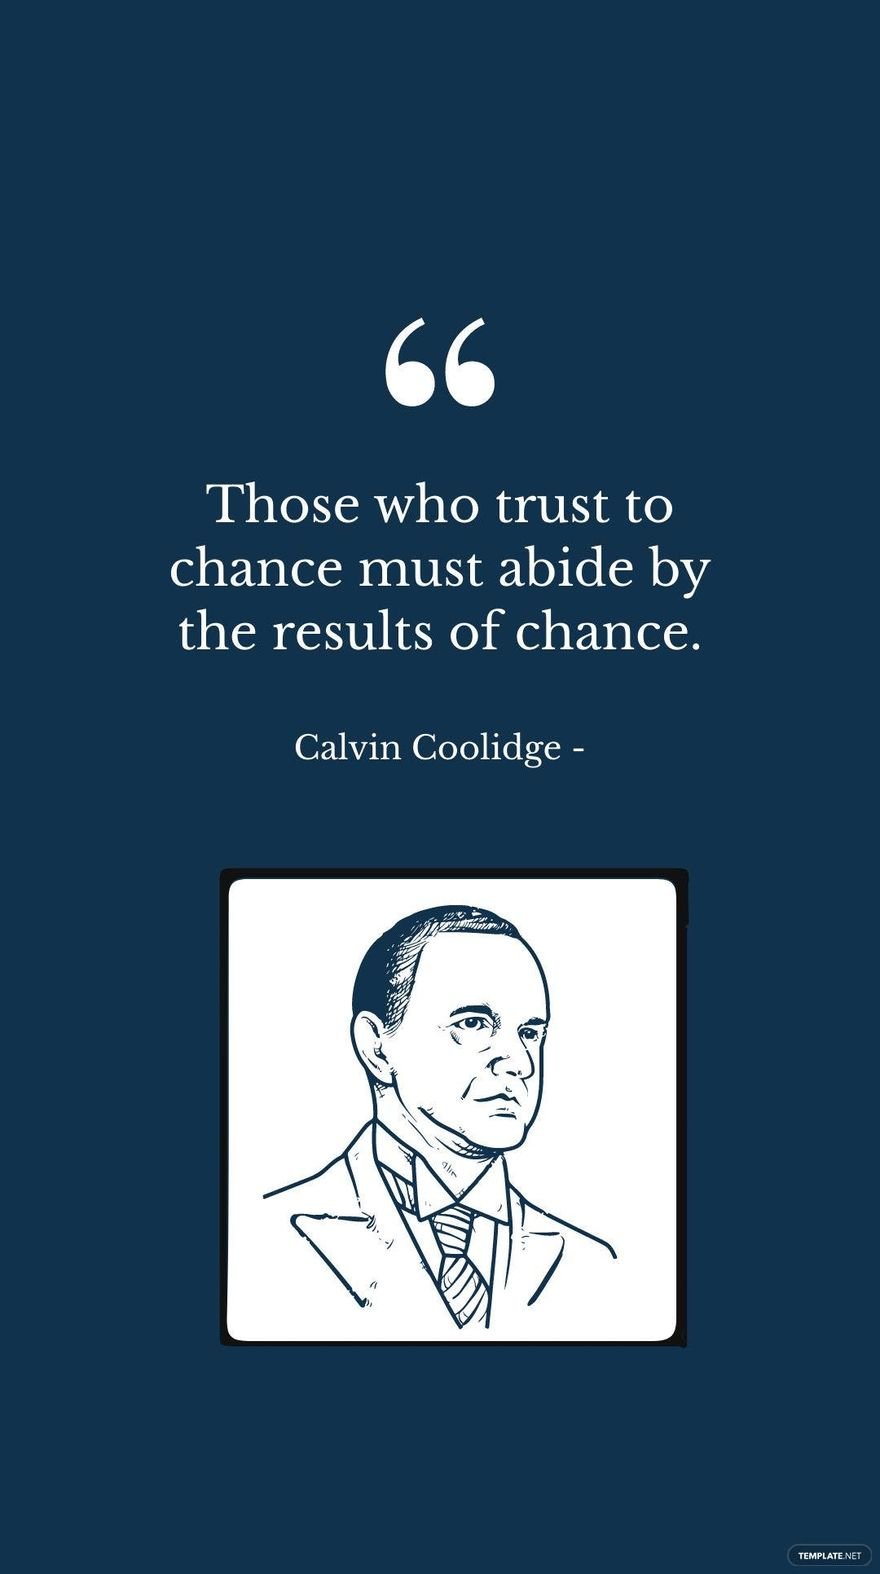 Calvin Coolidge - Those who trust to chance must abide by the results of chance.